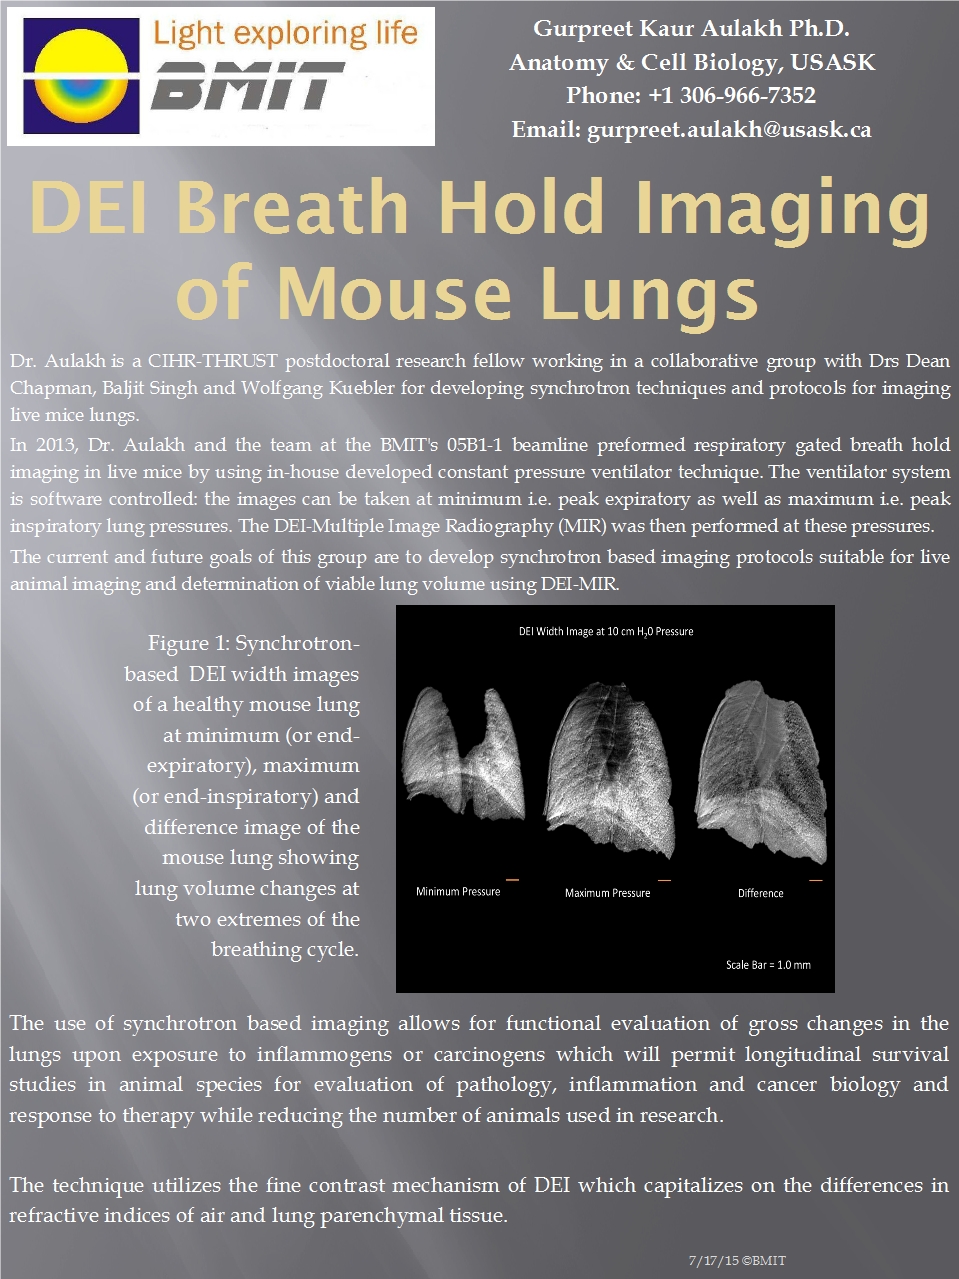 DEI Breath Hold Imaging Of Mouse Lungs Image